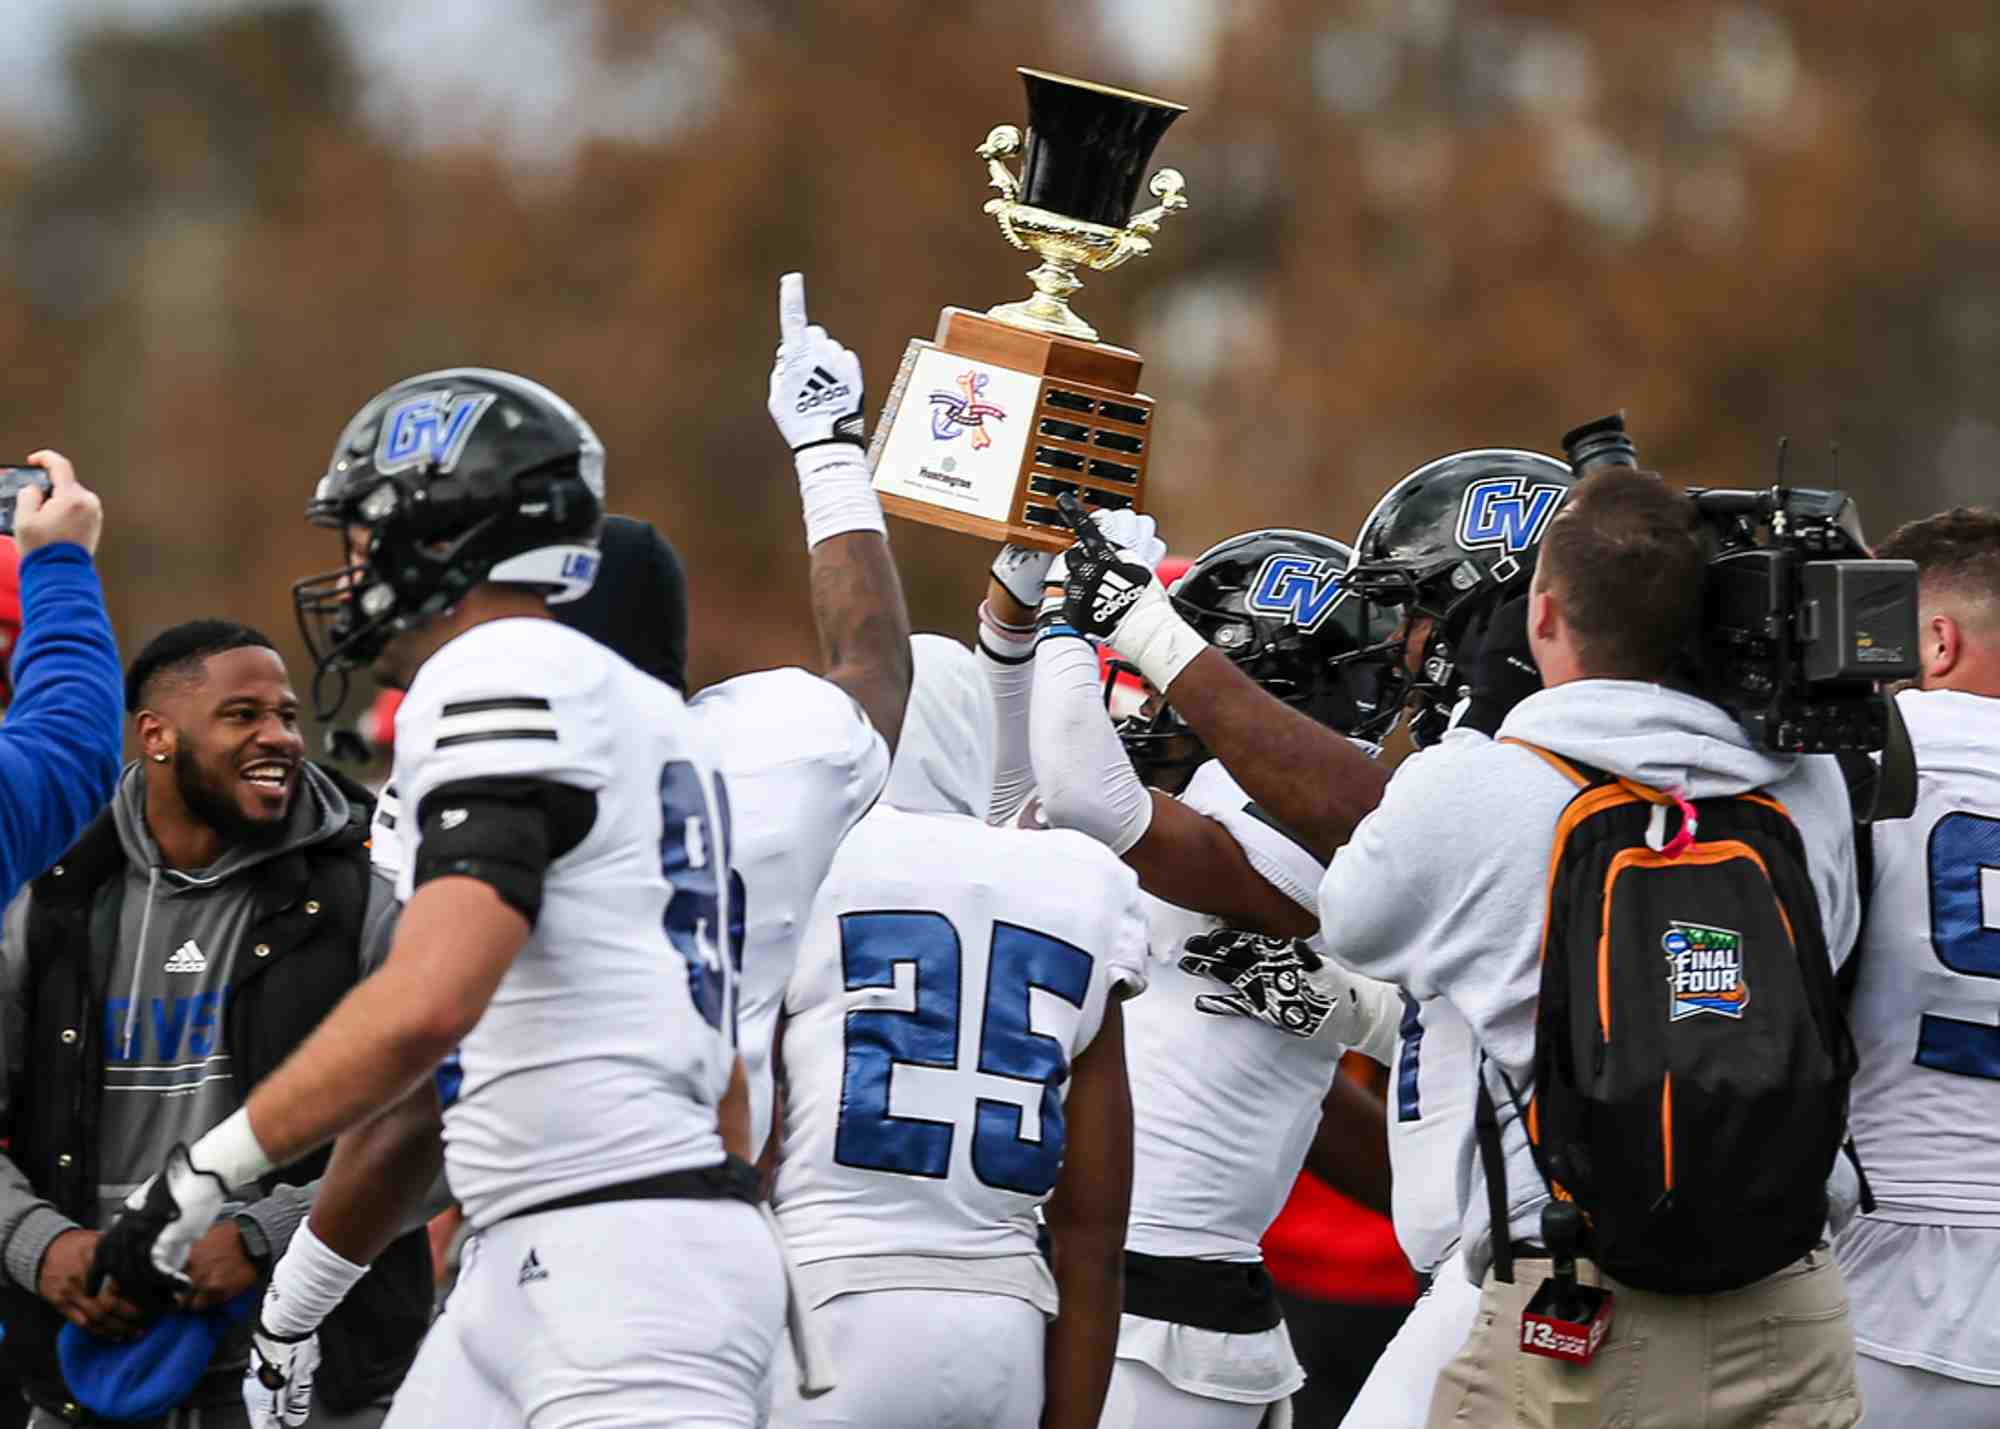 No. 1 Grand Valley football heads north to face Michigan Tech GVNext